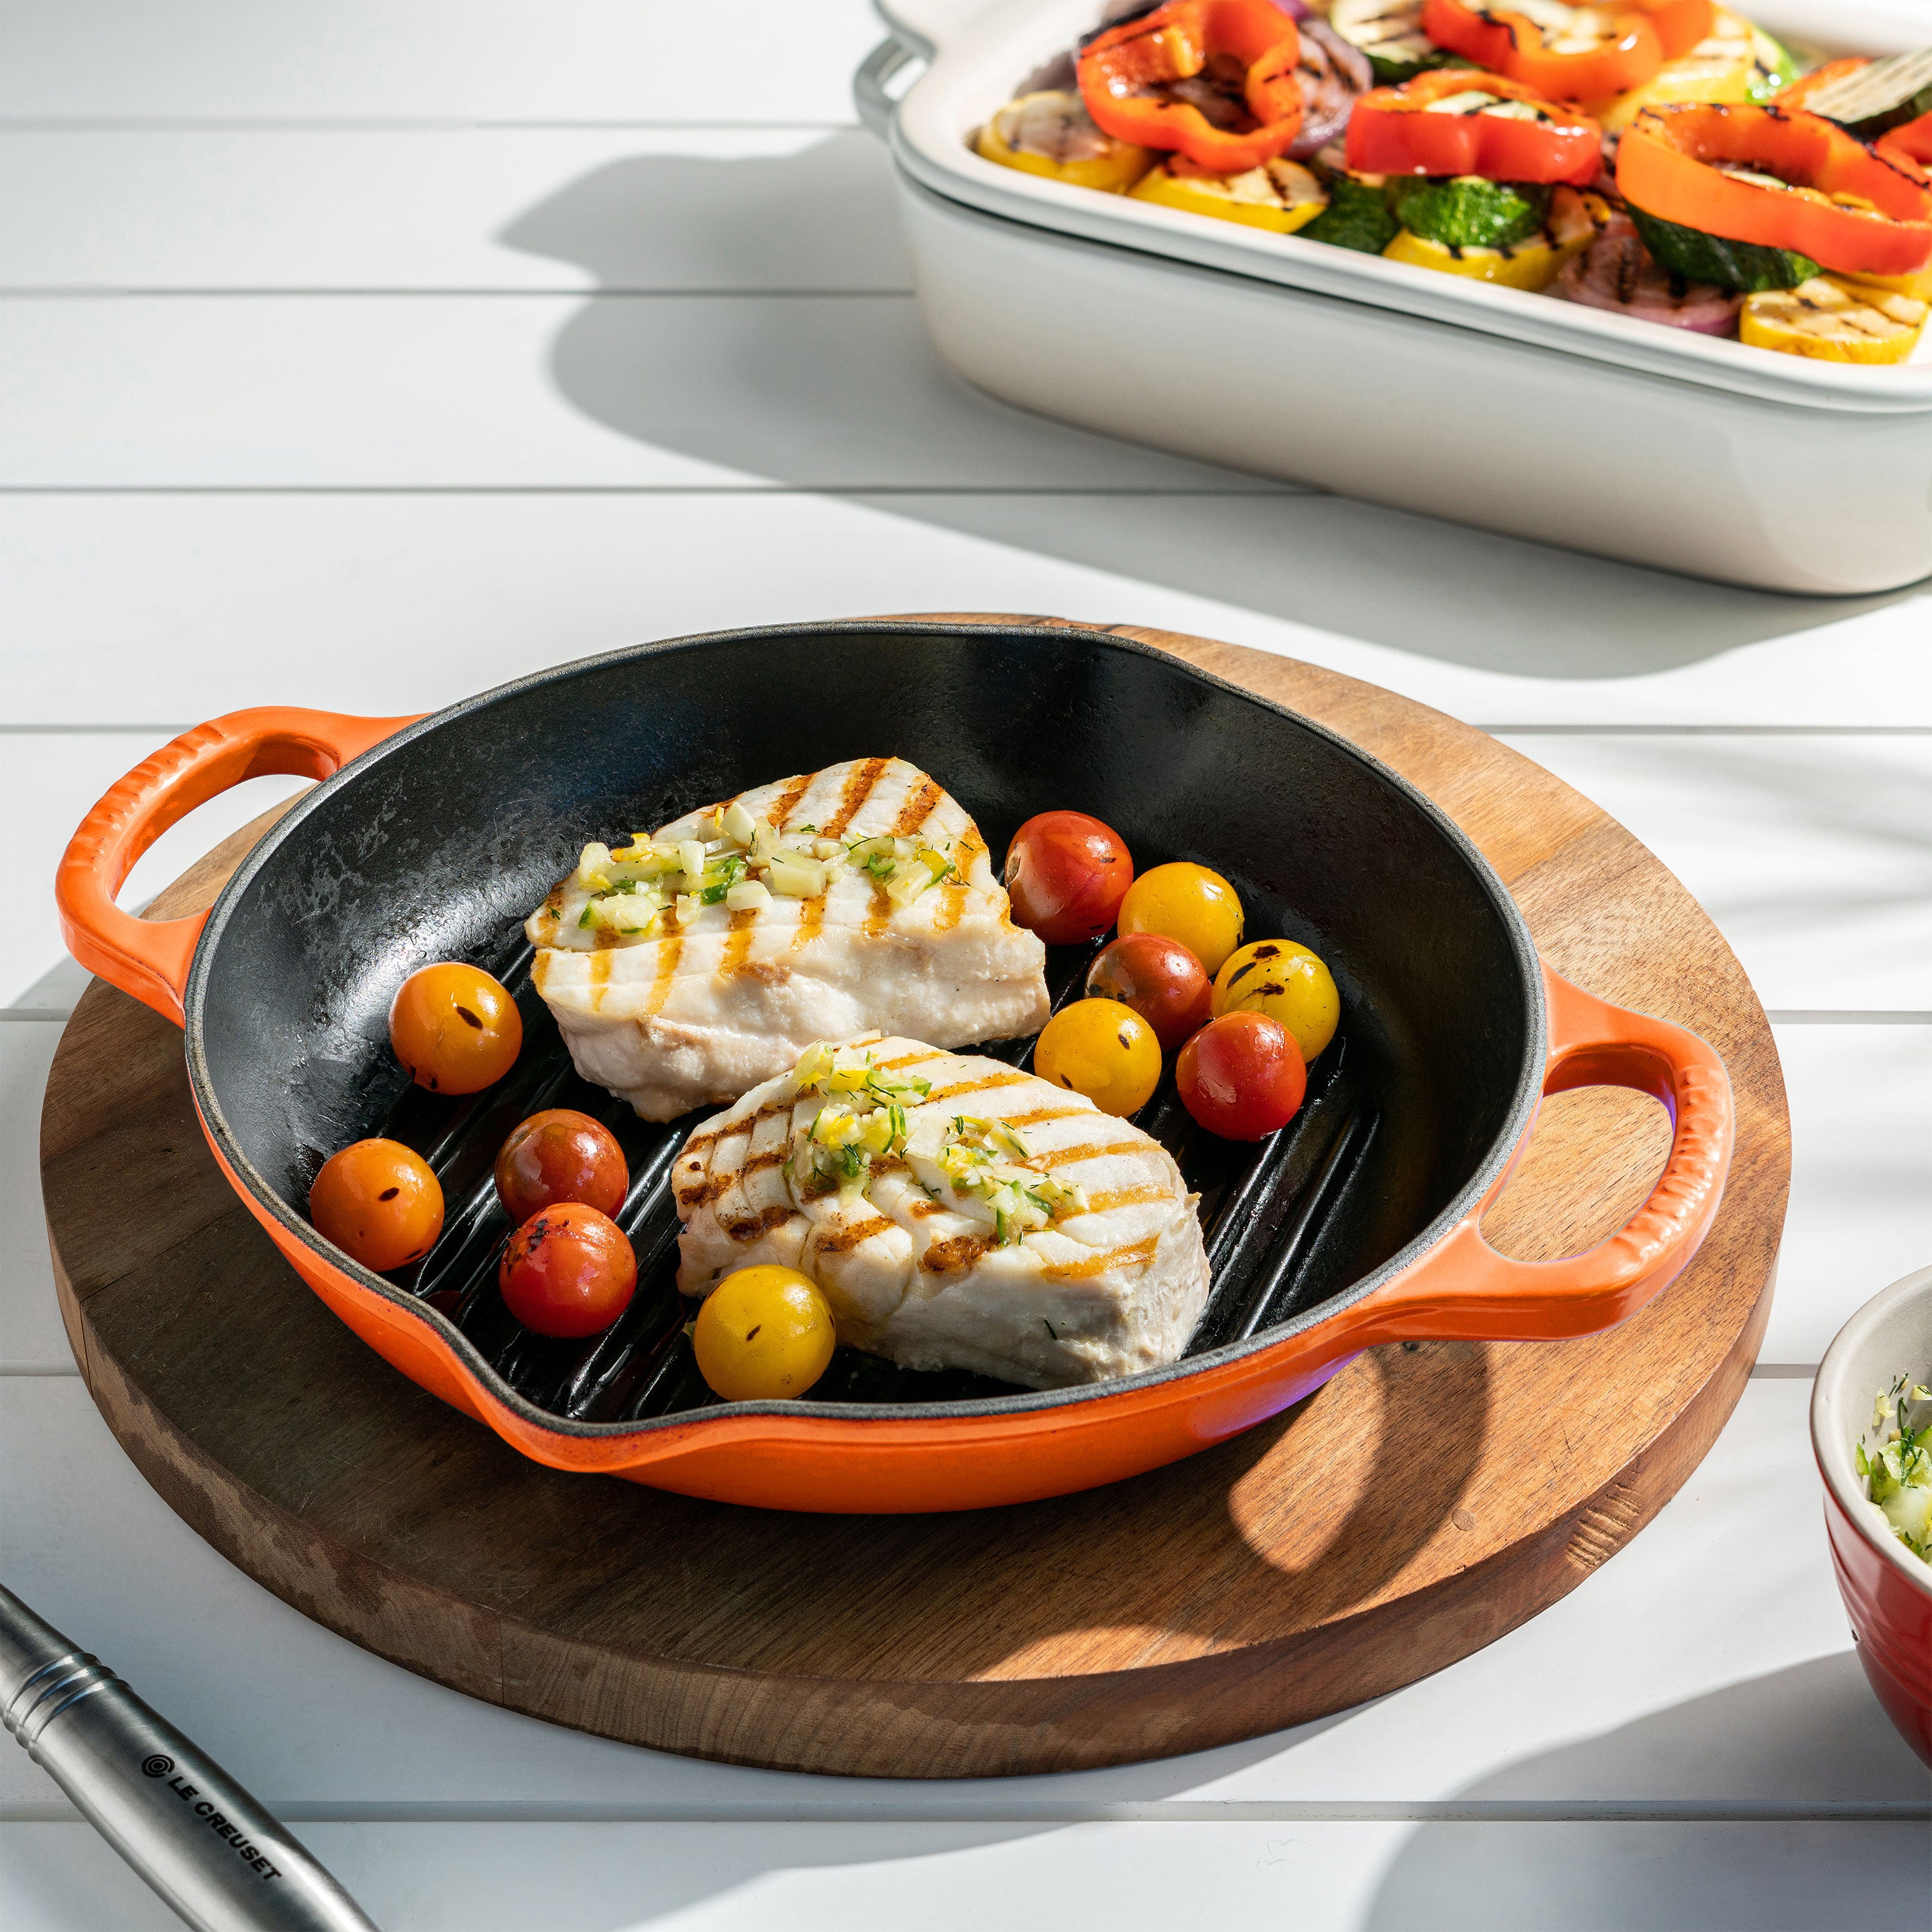 Le Creuset | Signature Deep Round Grill - Flame